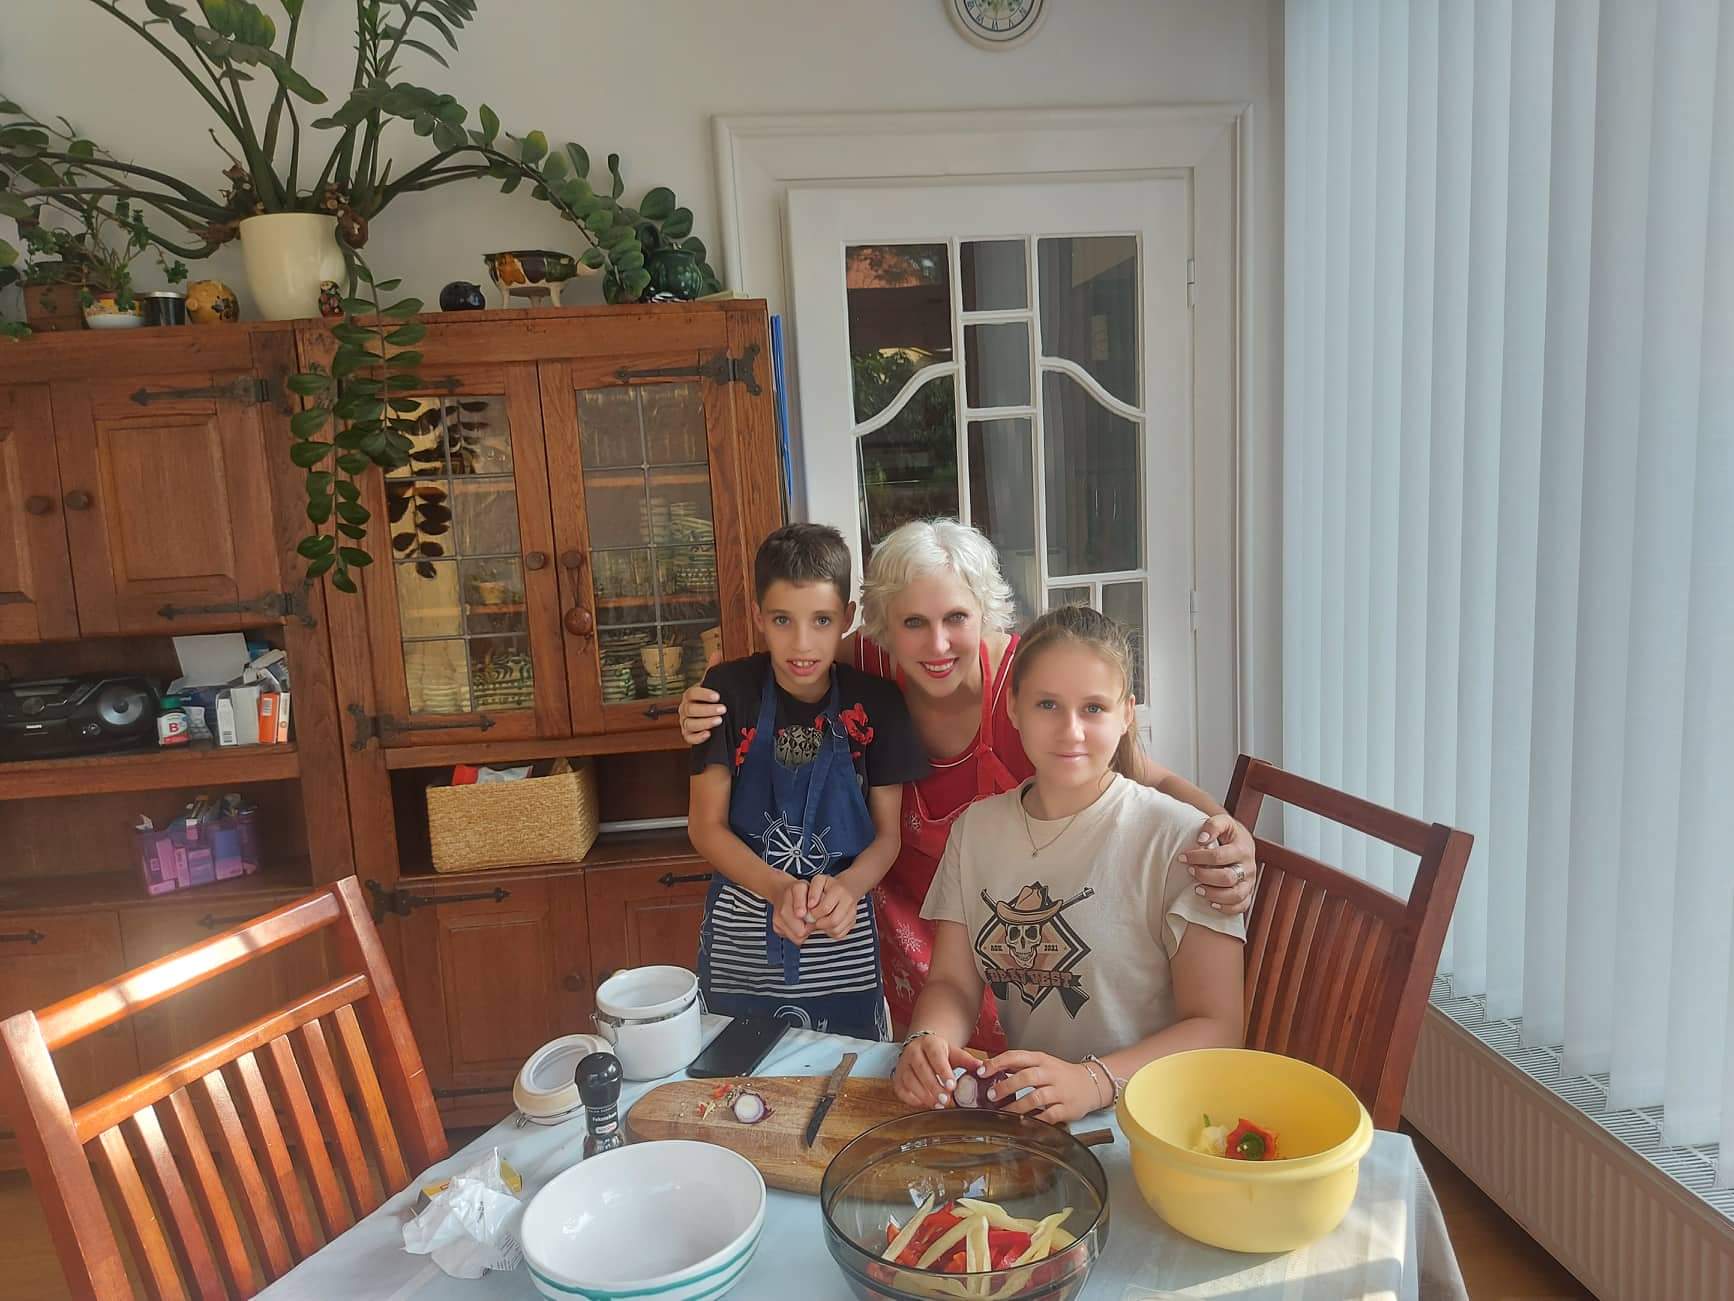 Kelli Buzzard, Budapest Fellow, posing for a picture with a Hungarian family by their dinner table at their home.